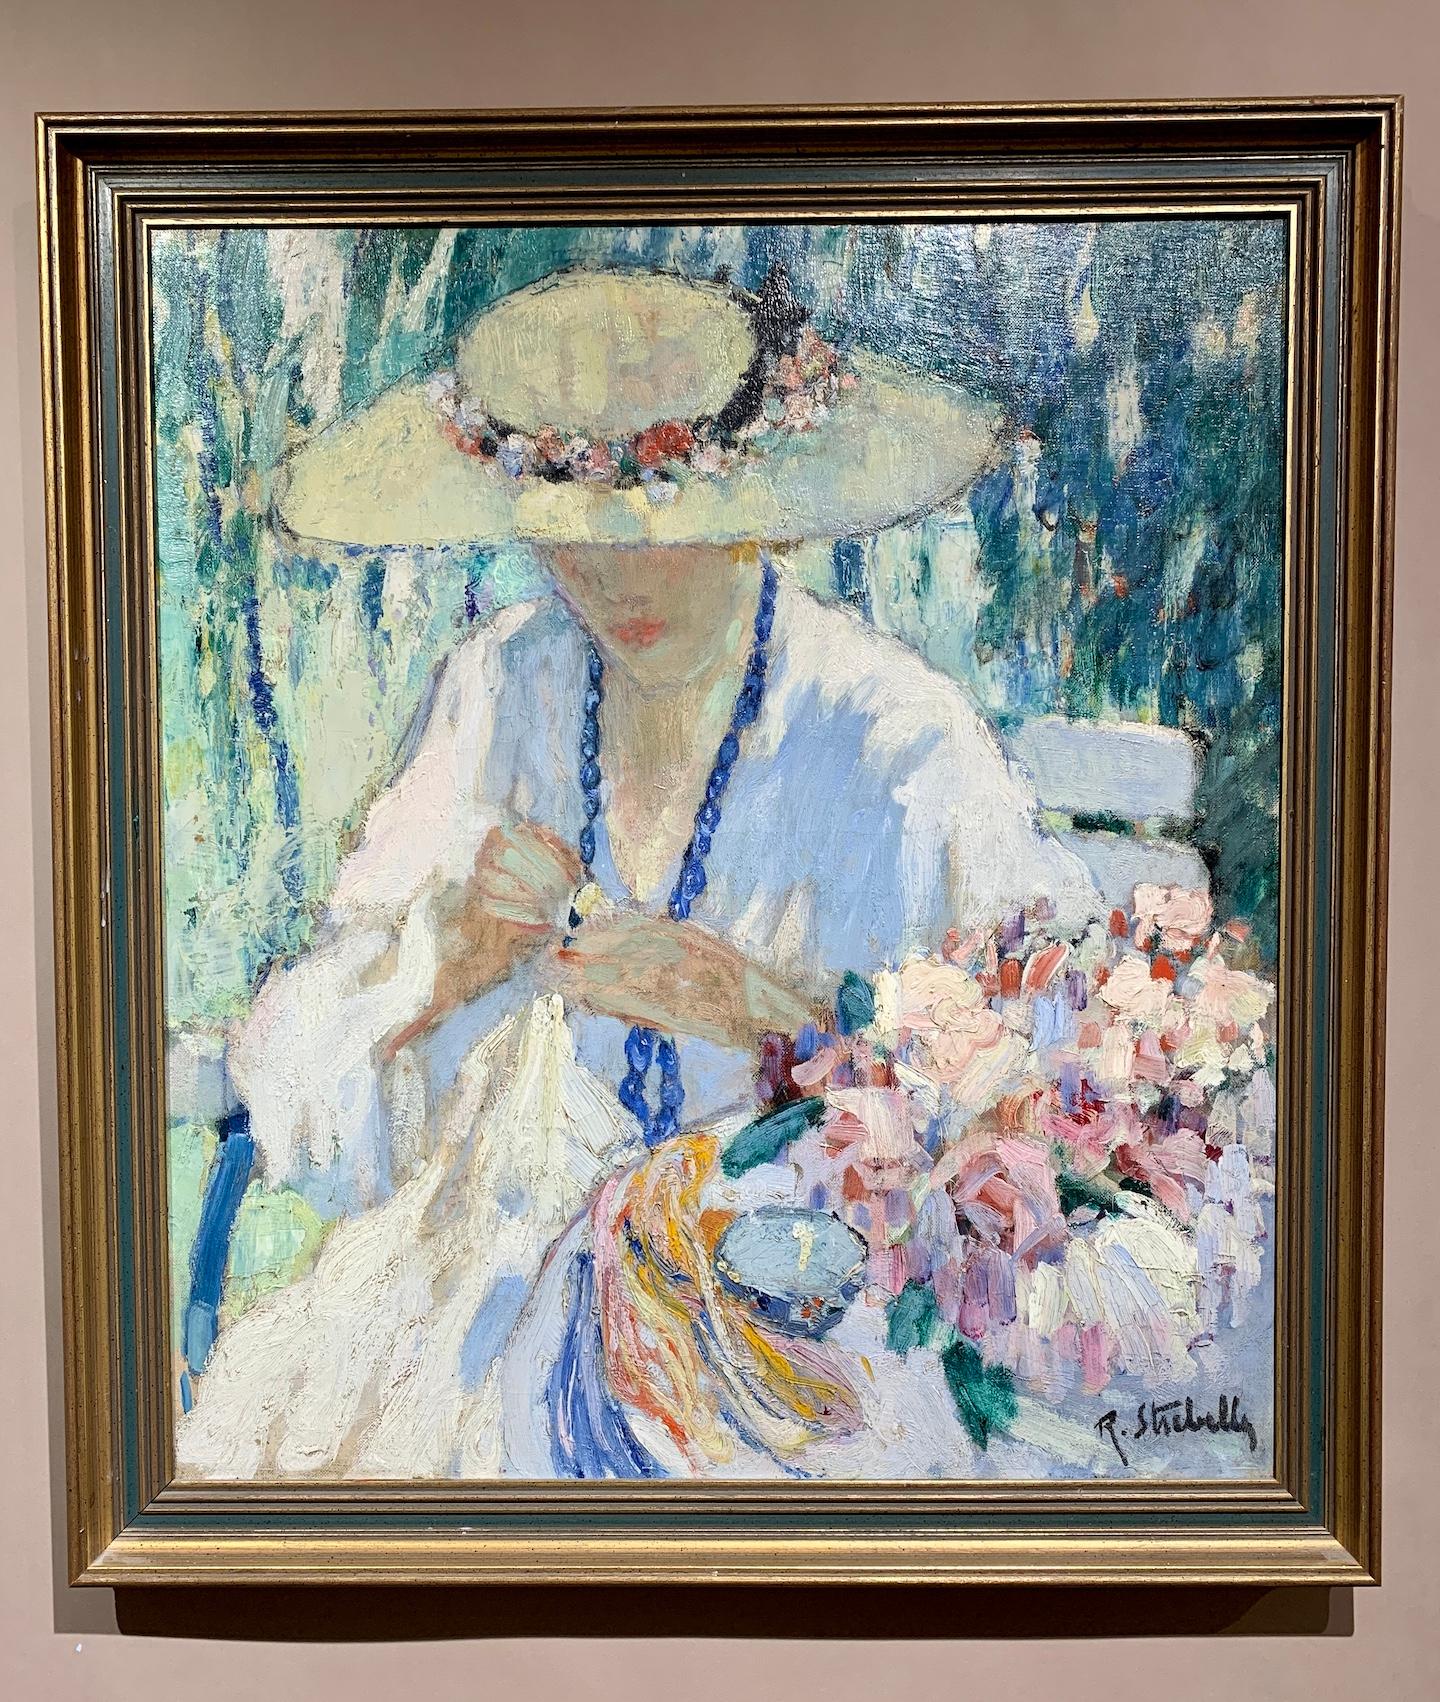 Rodolphe Strebelle Figurative Painting - Belgium Impressionist Portrait of a lady holding some flowers in a garden.